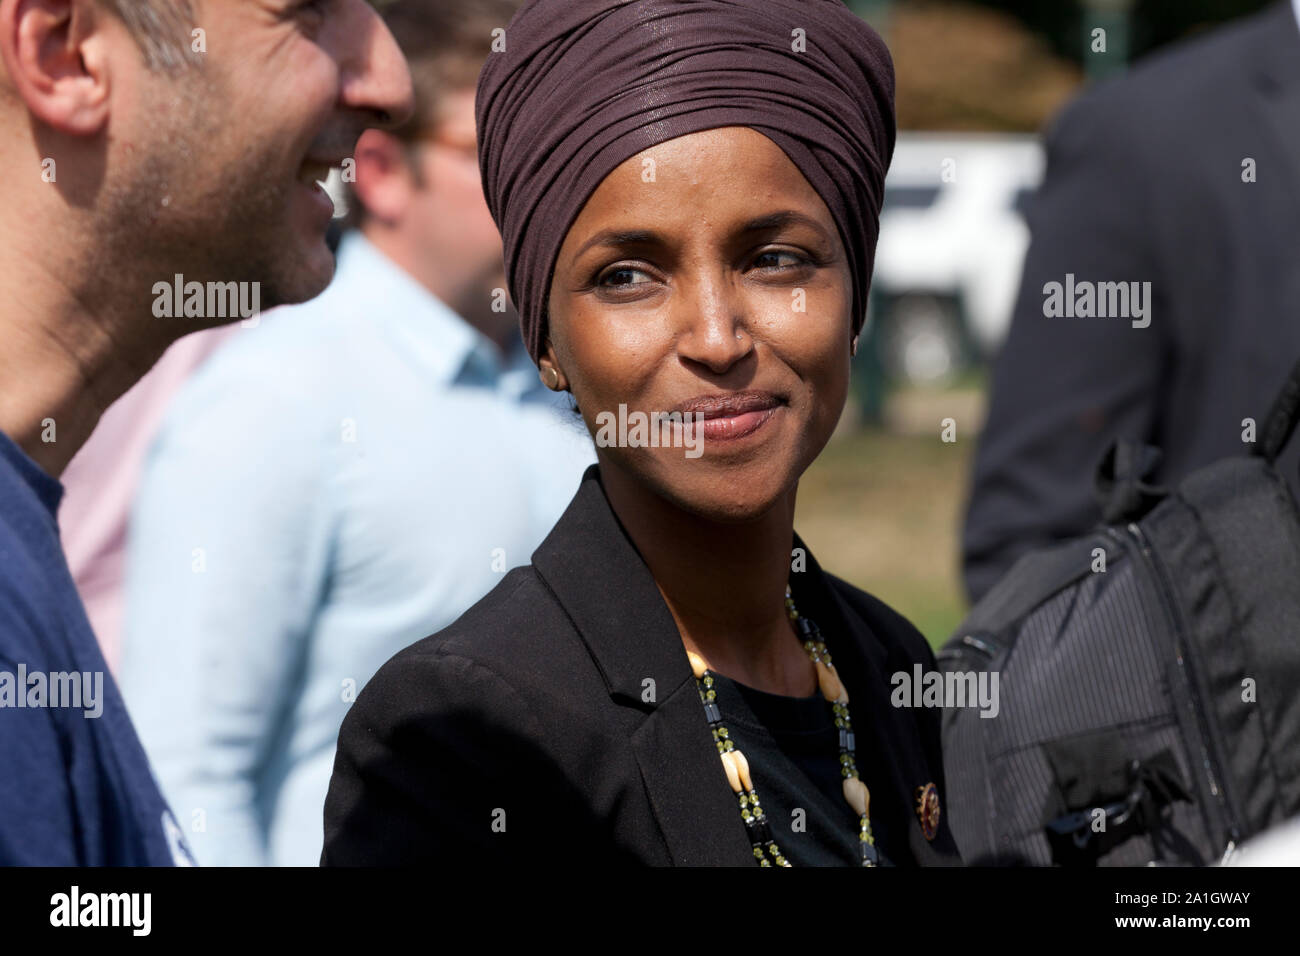 Sept. 26th, 2019, Washington, DC:  US Congresswoman Ilhan Omar (D-MN), Congresswoman Barbara Lee (D-CA), and Congressman Al Green (D-TX), speak at an 'Impeach Trump' rally, hosted by Progressive Democrats of America, in front of the US Capitol.  Pictured: Rep. Ilhan Omar (D-MN) meets with supporters. Stock Photo